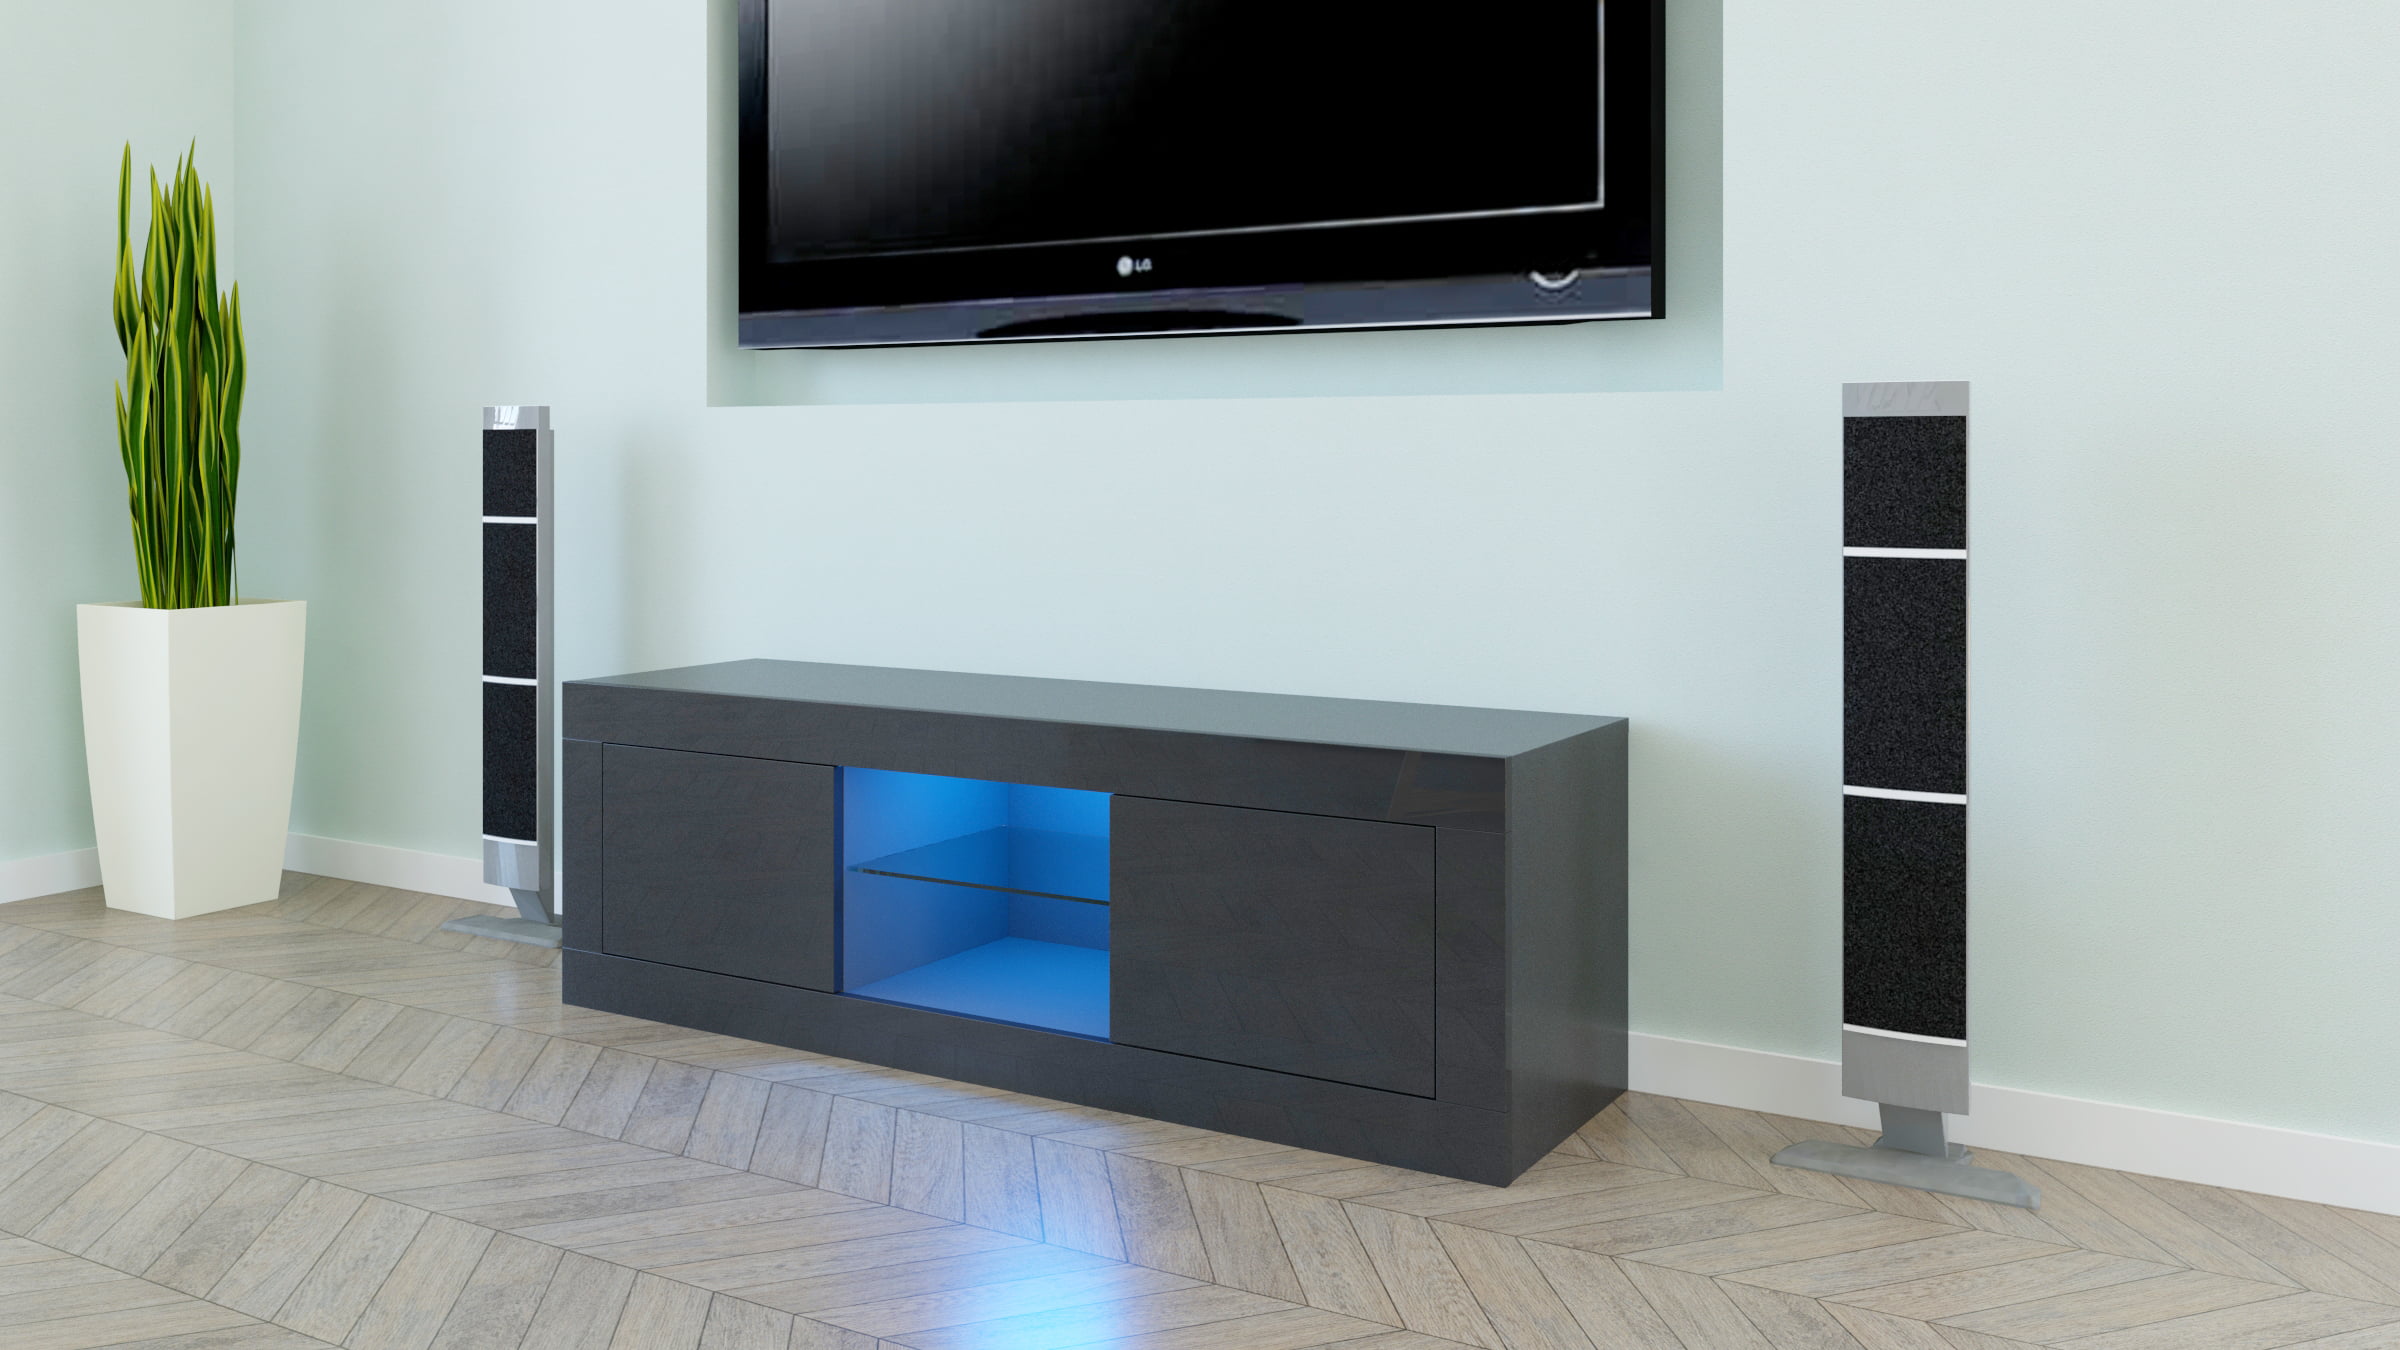 Zimtown Tv Stand Cabinetmodern Black Tv Stand With Led Lighthigh